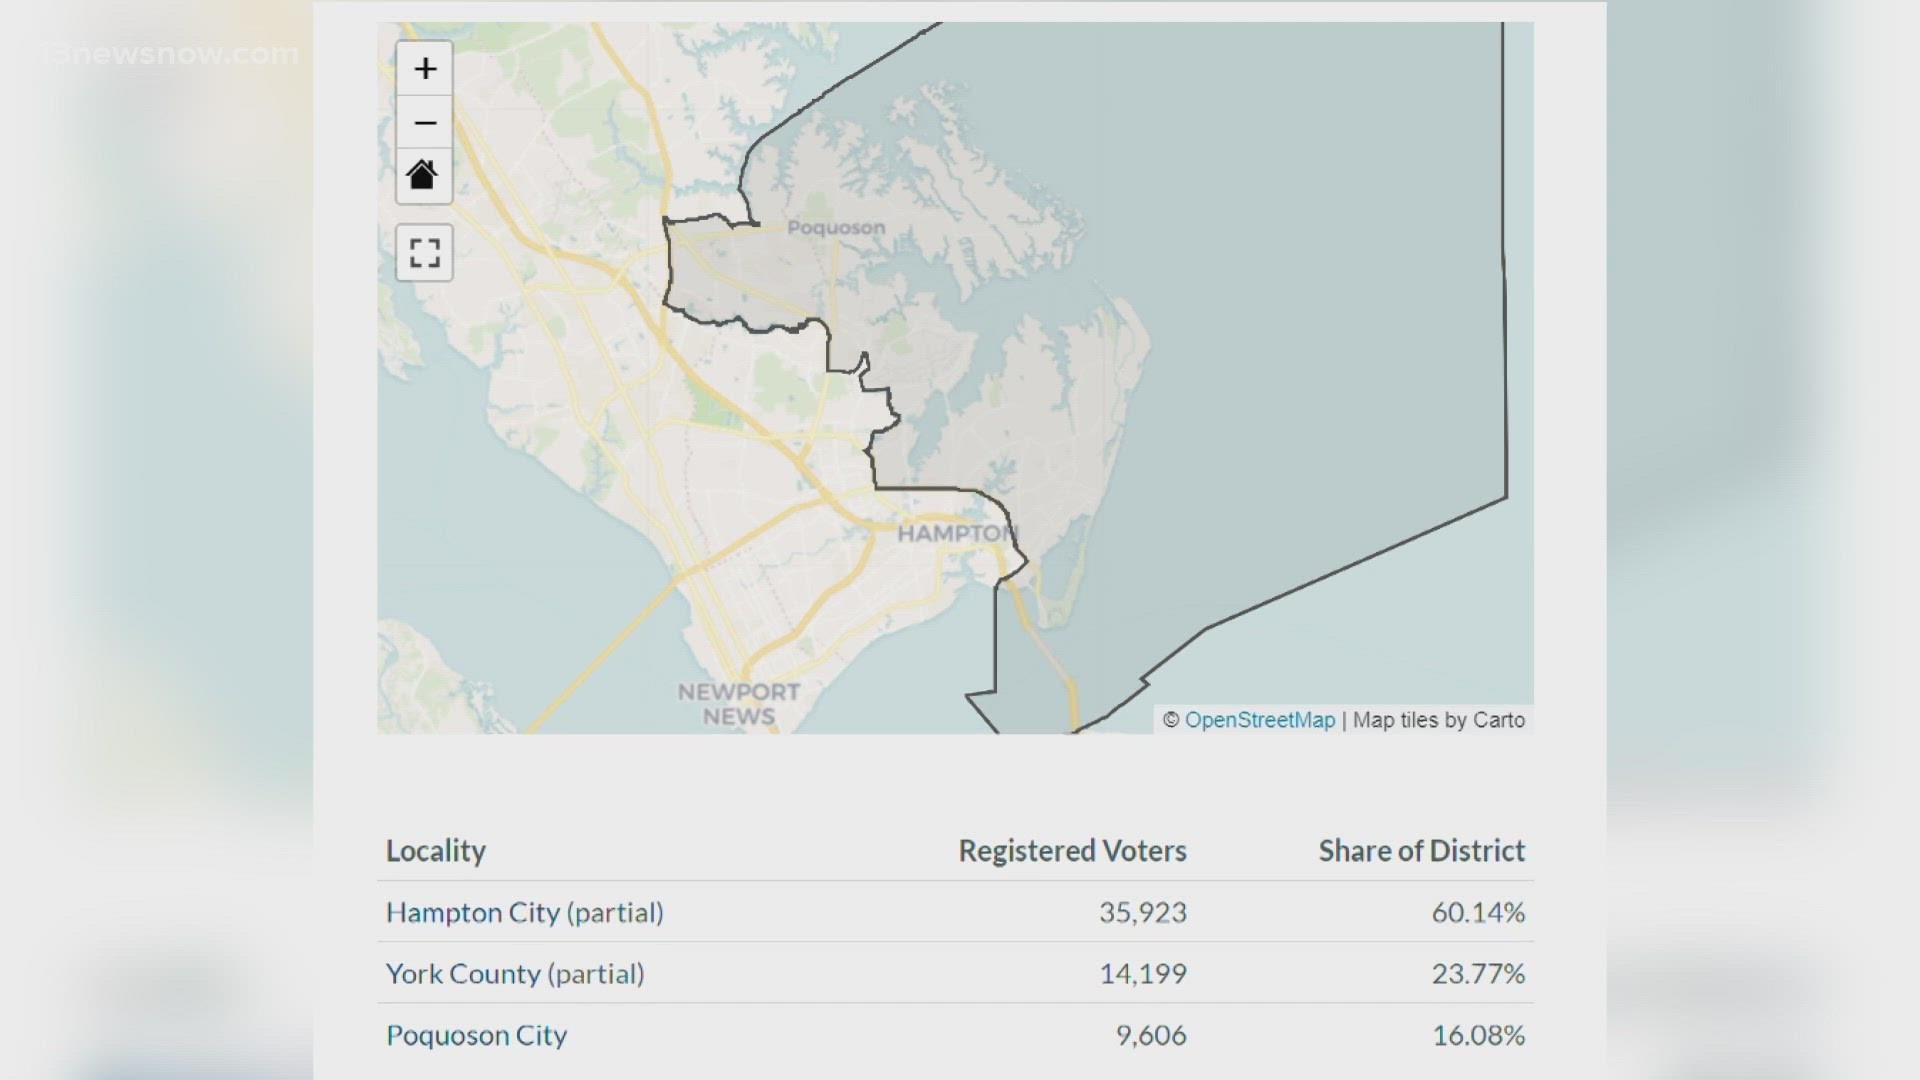 The newly drawn 86th District encompasses portions of the Peninsula, covering parts of Hampton, York County, and all of Poquoson.